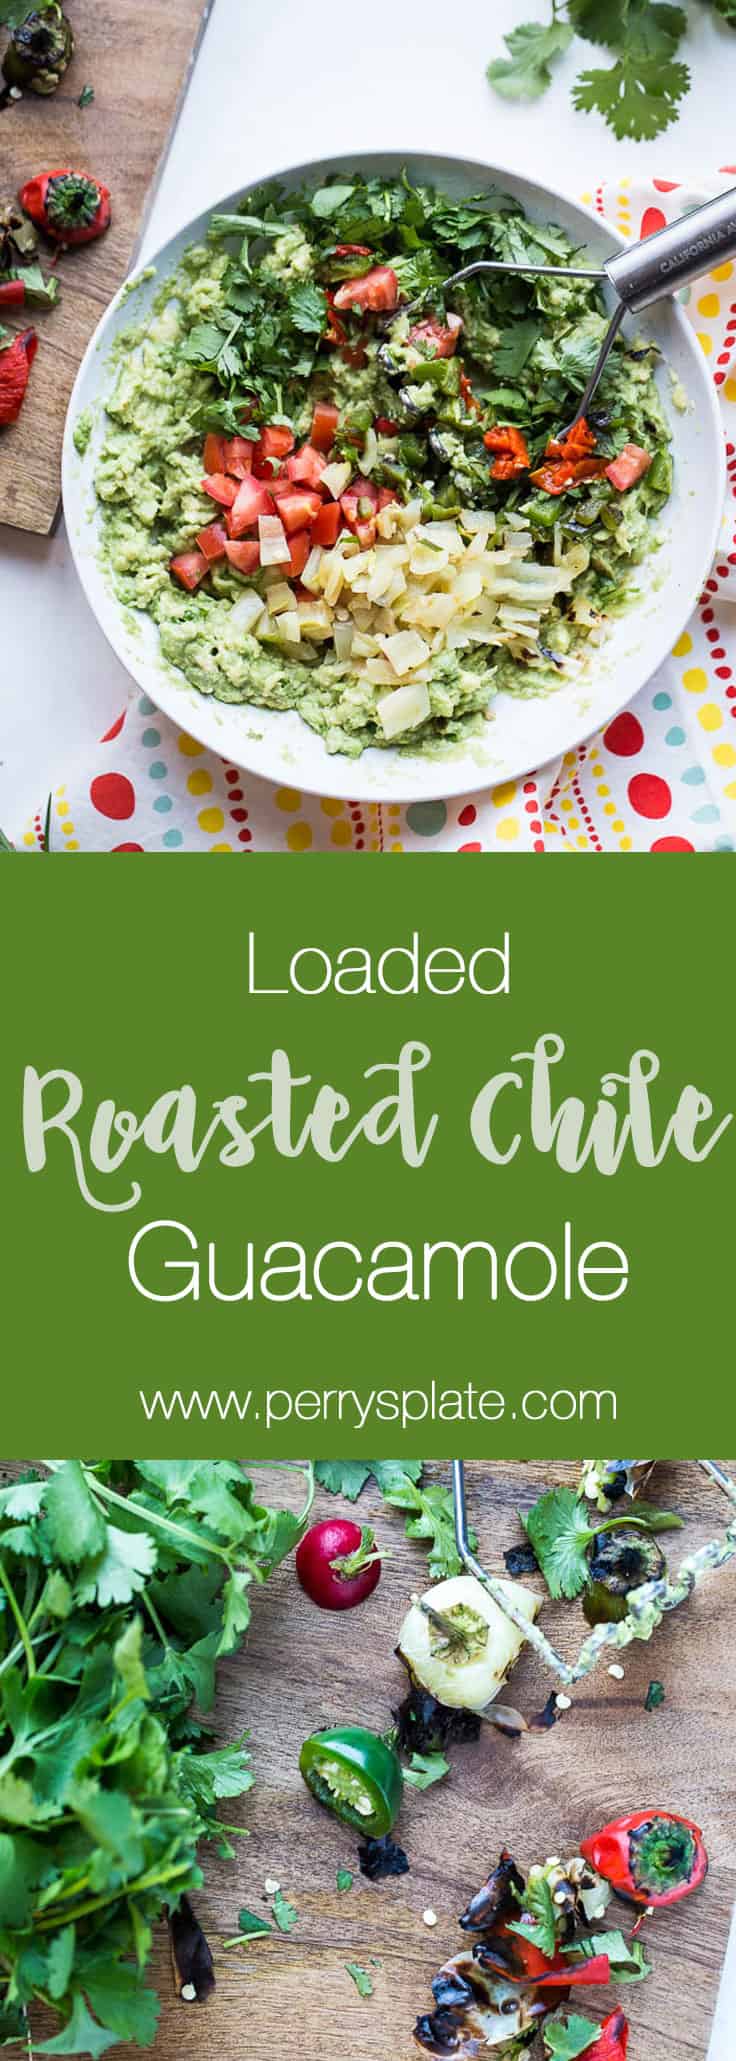 You haven't lived until you've had roasted chiles in your guacamole. Grab this recipe for Loaded Roasted Chile Guacamole! | guacamole recipes | perrysplate.com